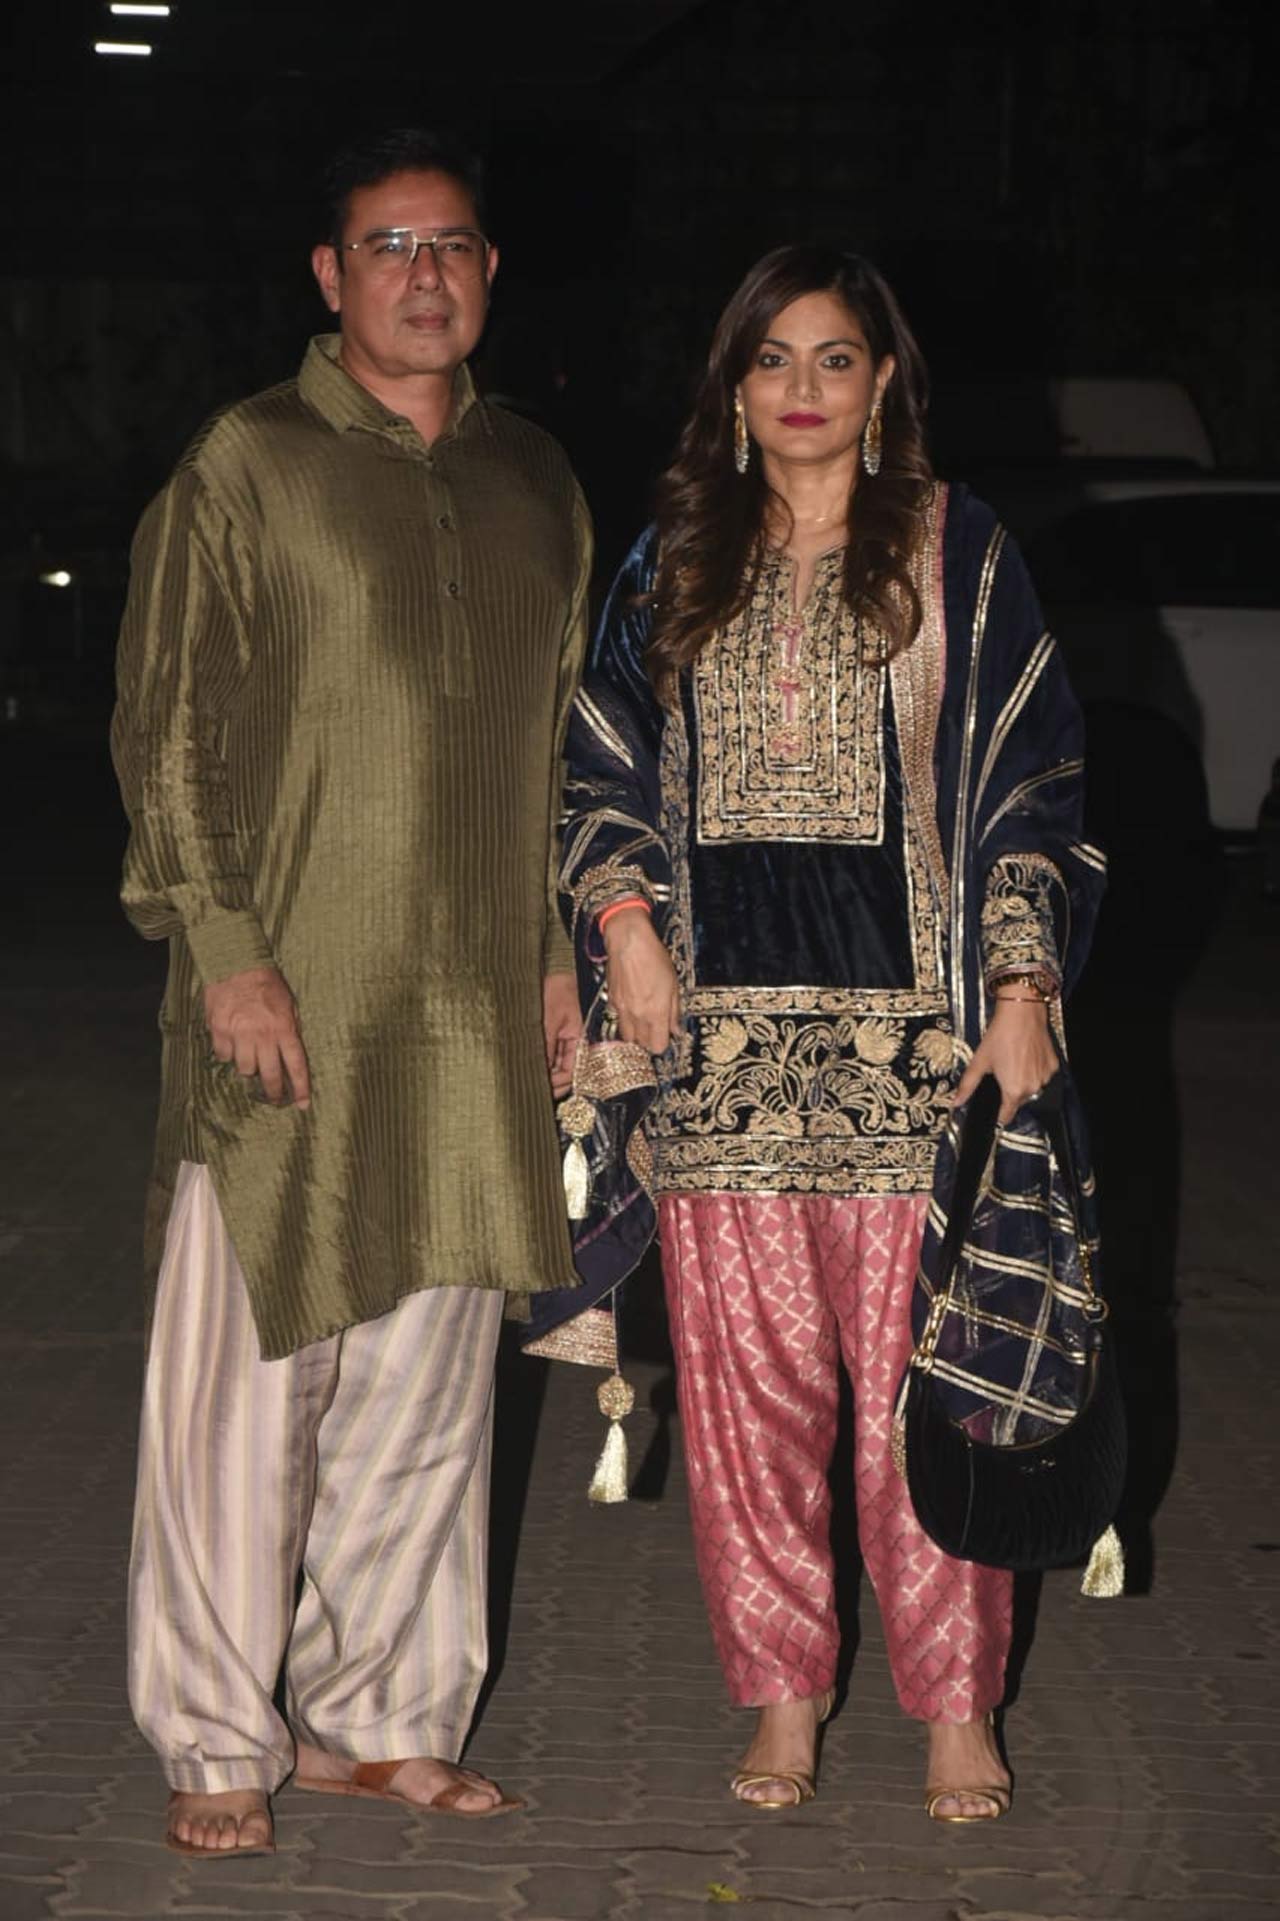 Atul Agnihotri and his wife Alvira Khan Agnihotri posed for the shutterbugs as they attended Sohail Khan's Diwali party. Alvira looked pretty in a velvet ethnic outfit, whereas former actor Atul was seen wearing a classy silk kurta.